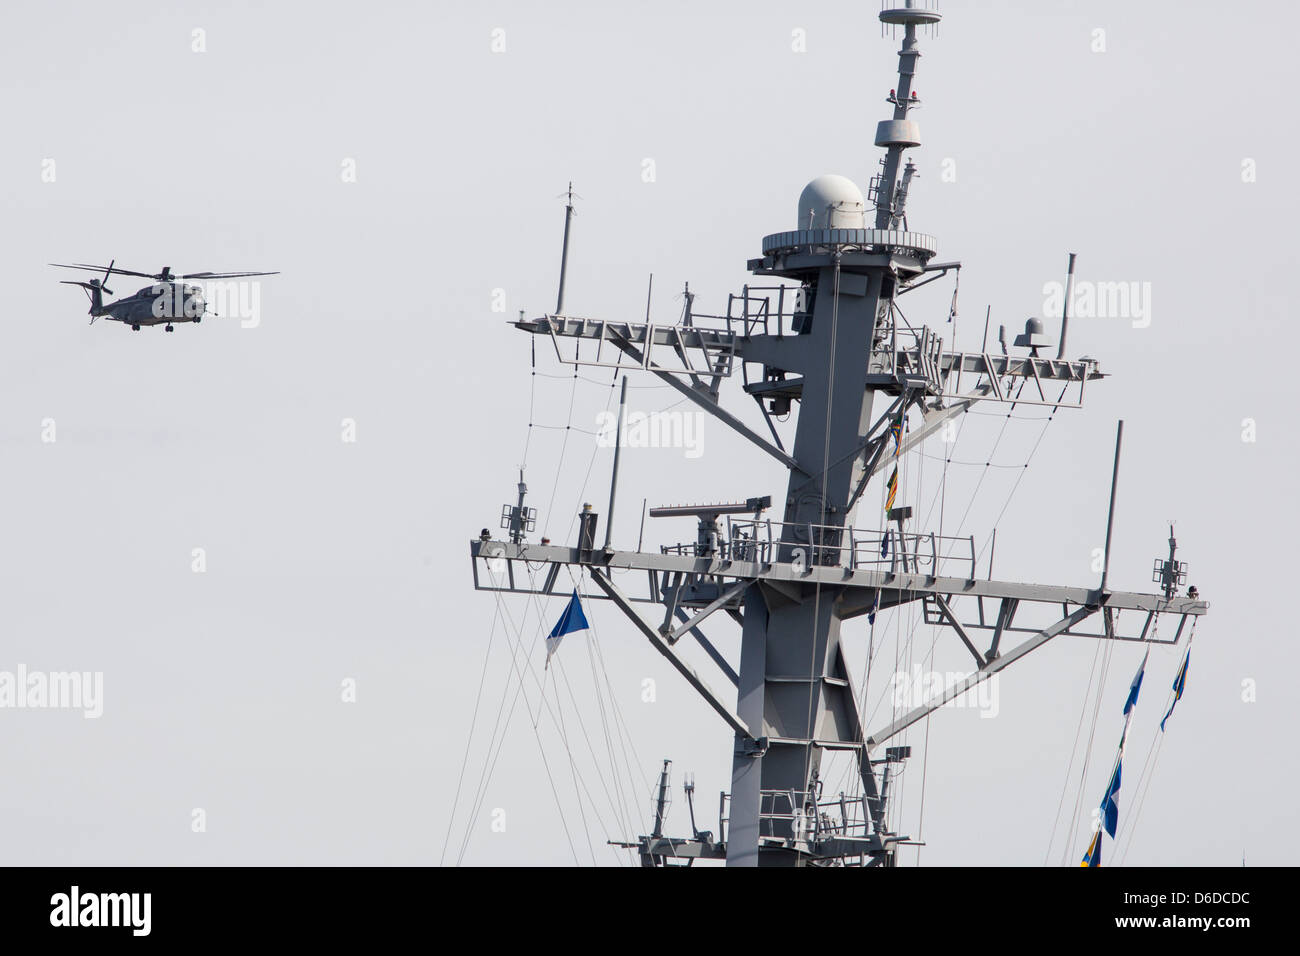 United States Navy ships in port at Naval Station Norfolk. Stock Photo